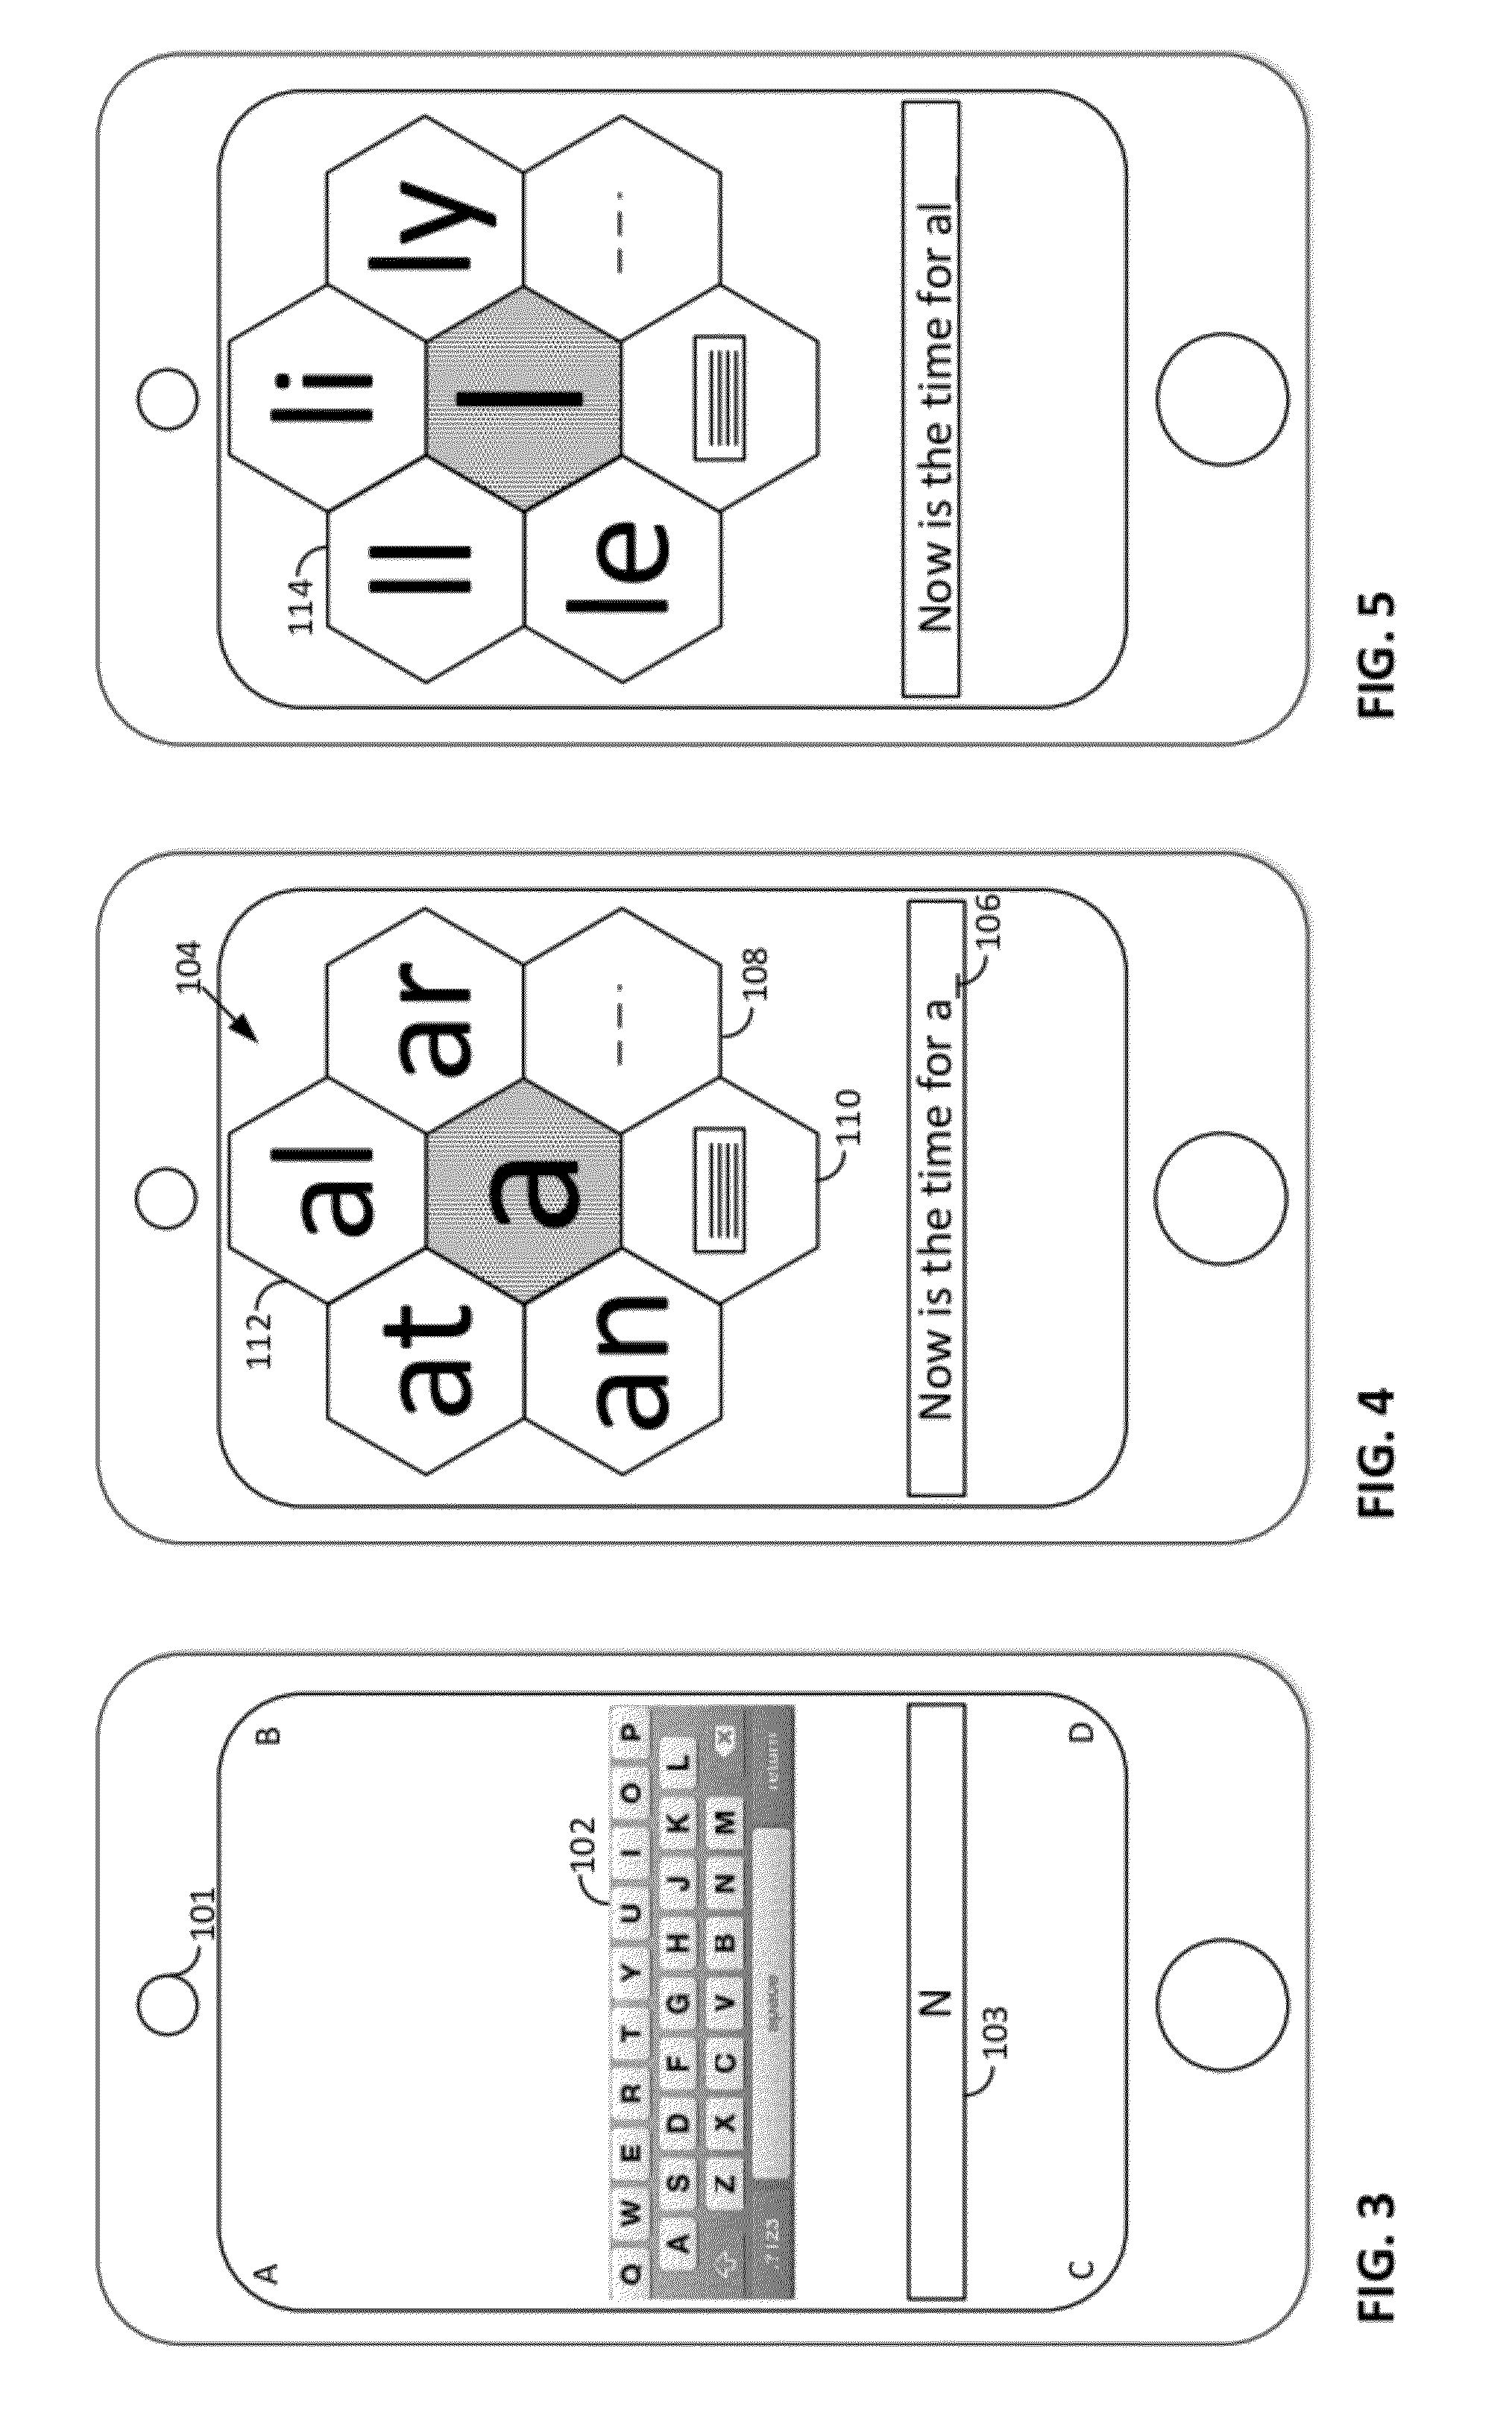 Smartphone-Based Methods and Systems